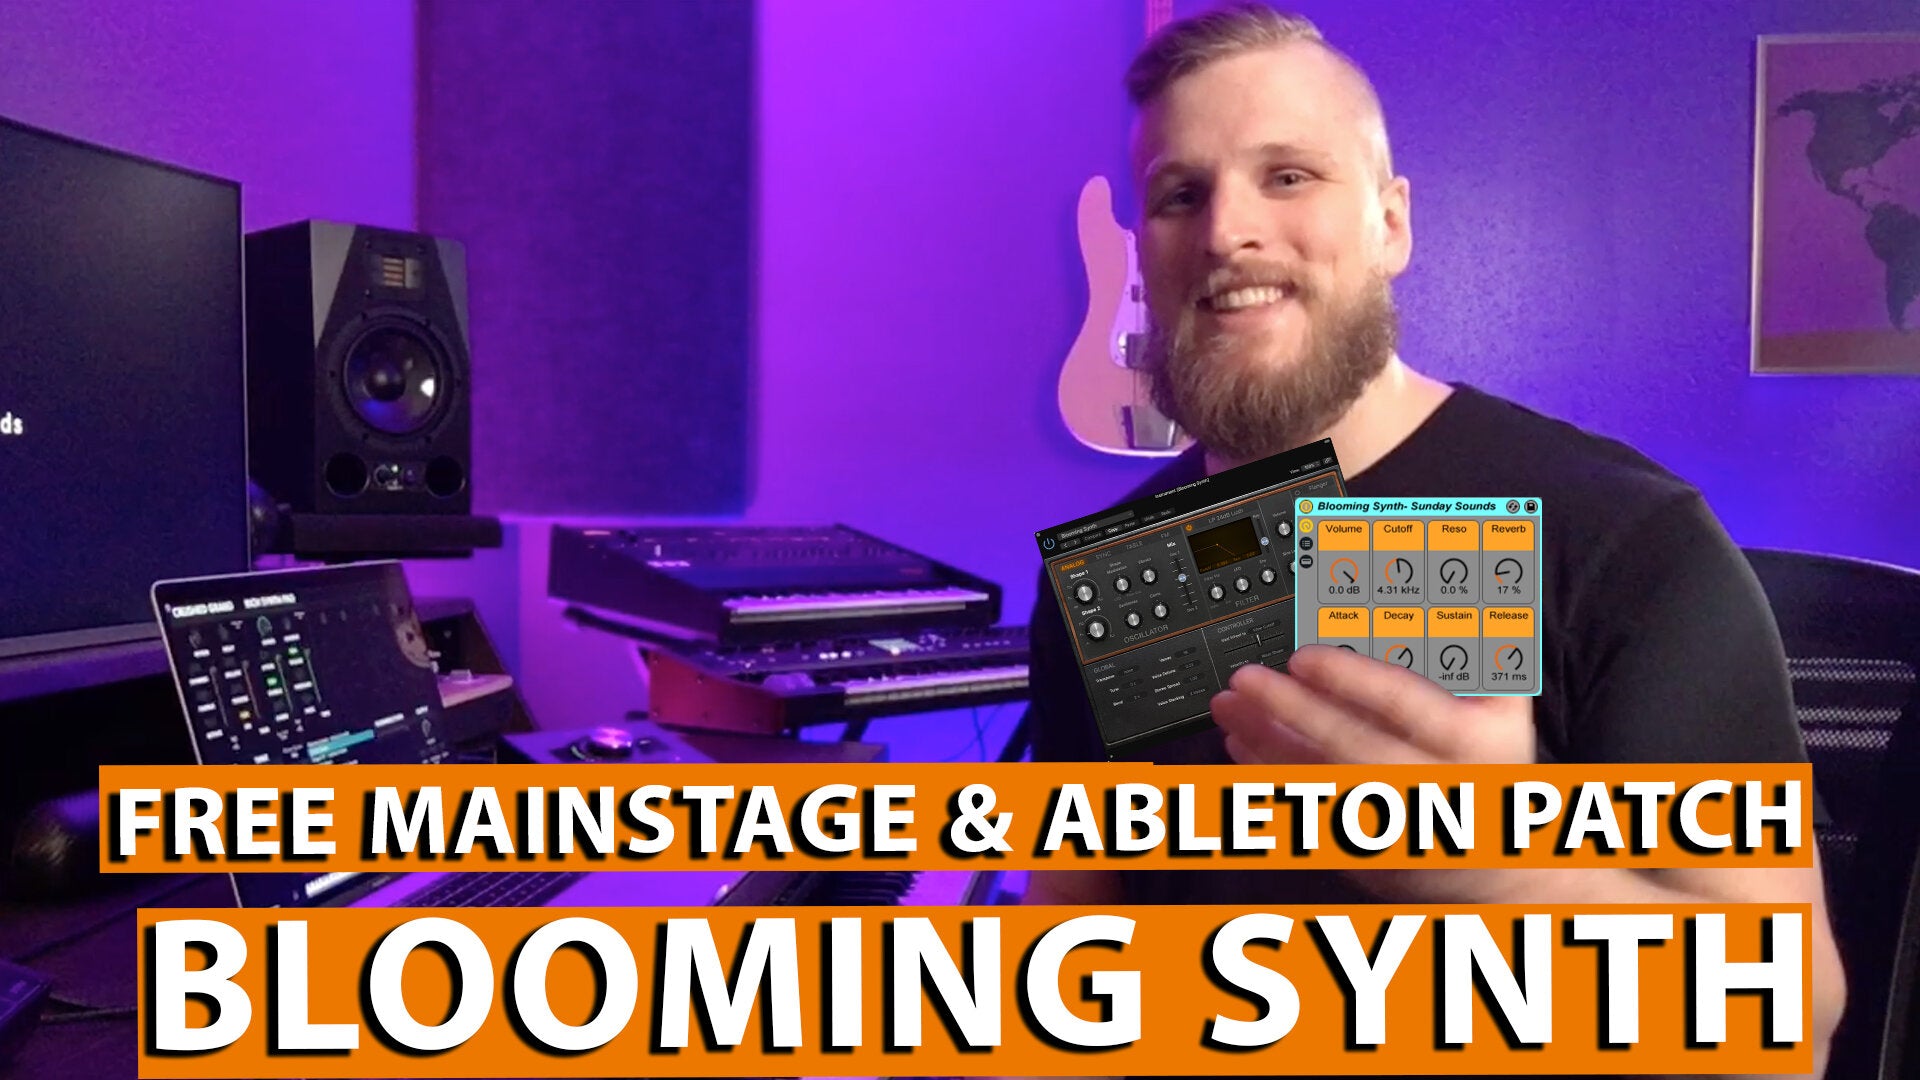 Free MainStage & Ableton Worship Patch! - Blooming Synth